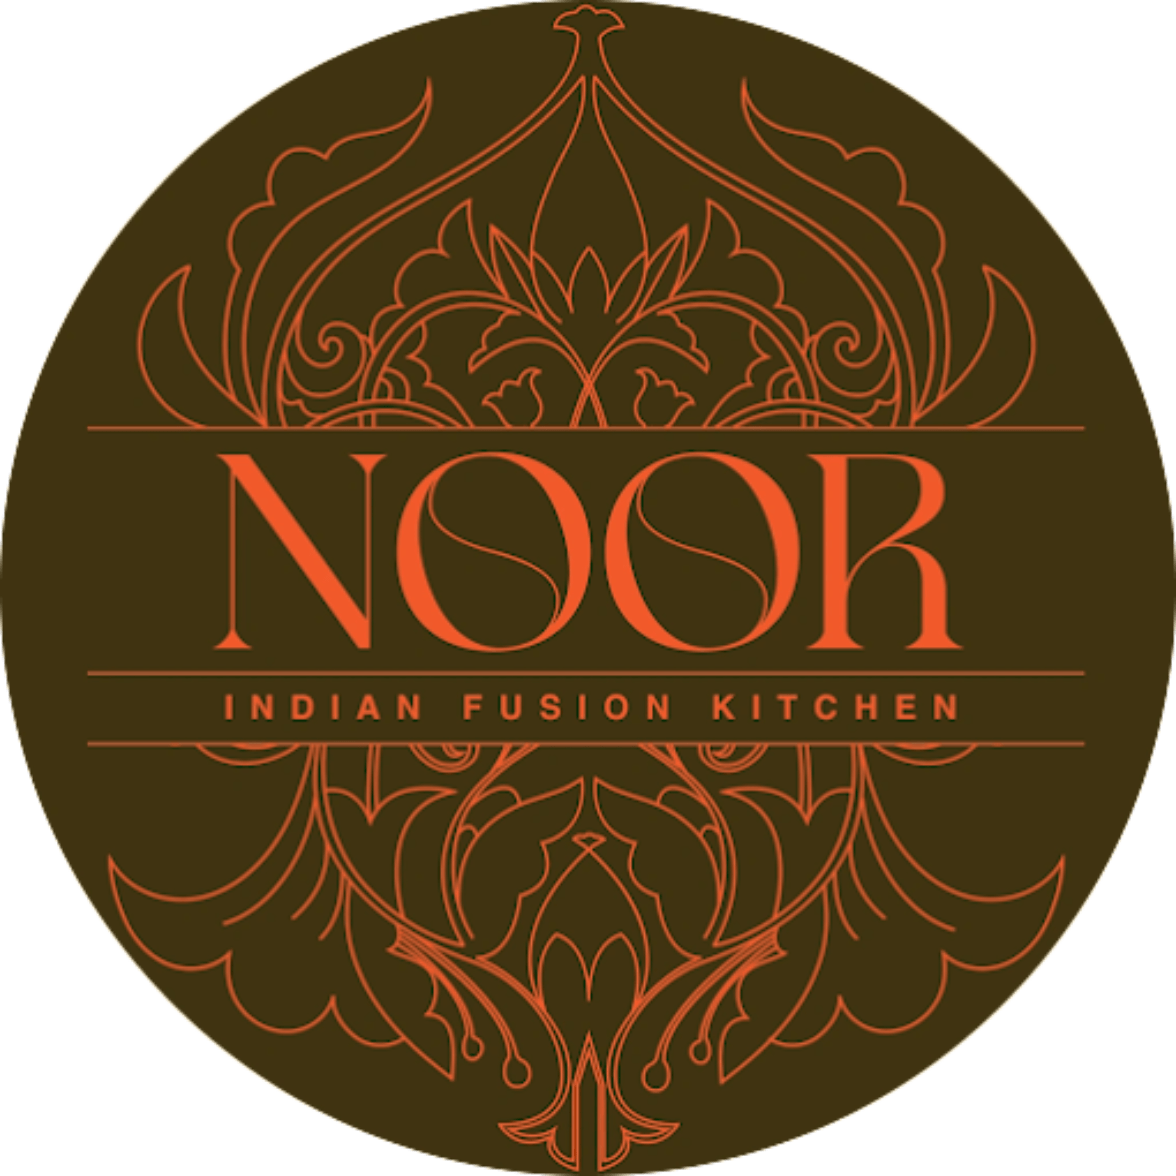 Welcome To Noor Indian Fusion Kitchen